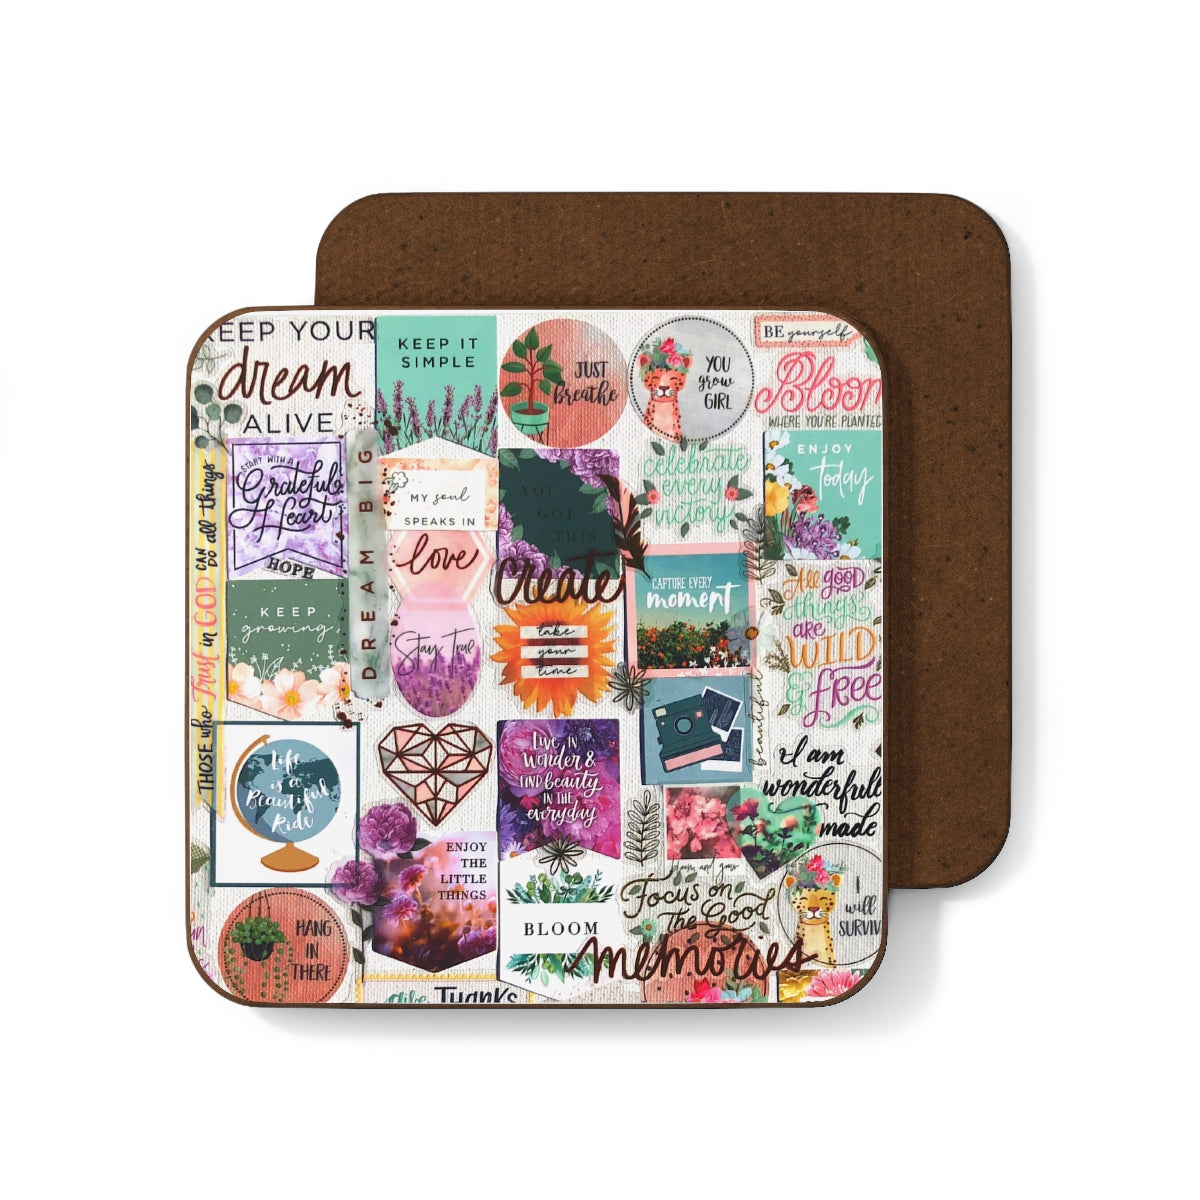 "Keep Your Dream Alive" Intention Board™️ Affirmation Coaster